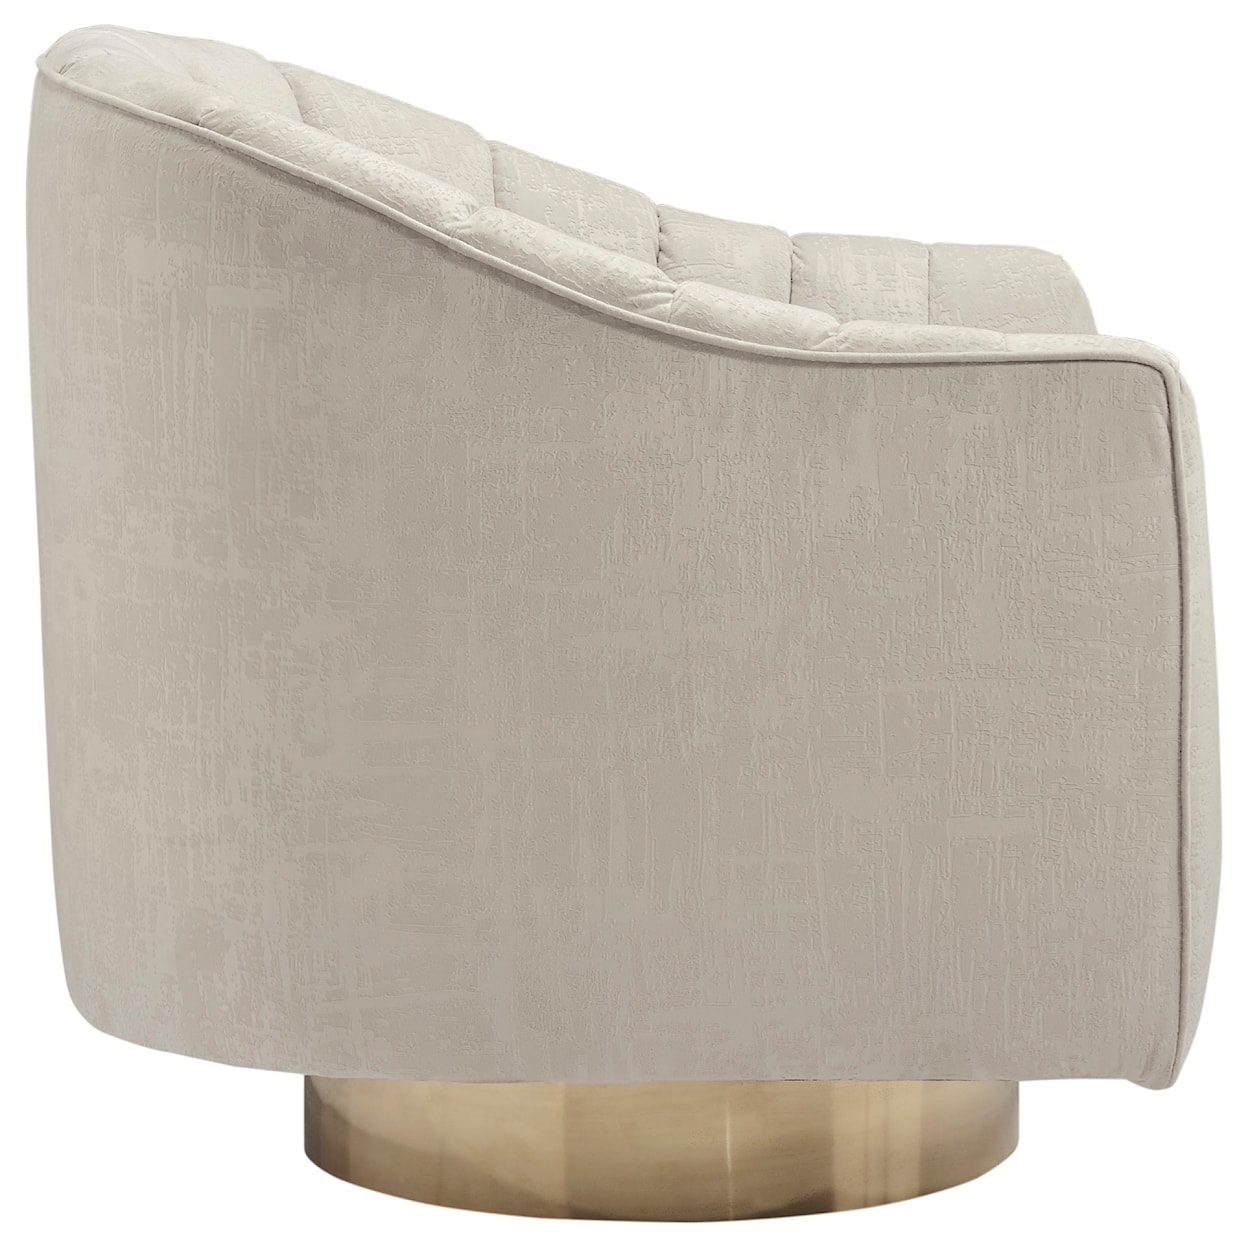 Signature Design by Ashley Penzlin Swivel Accent Chair